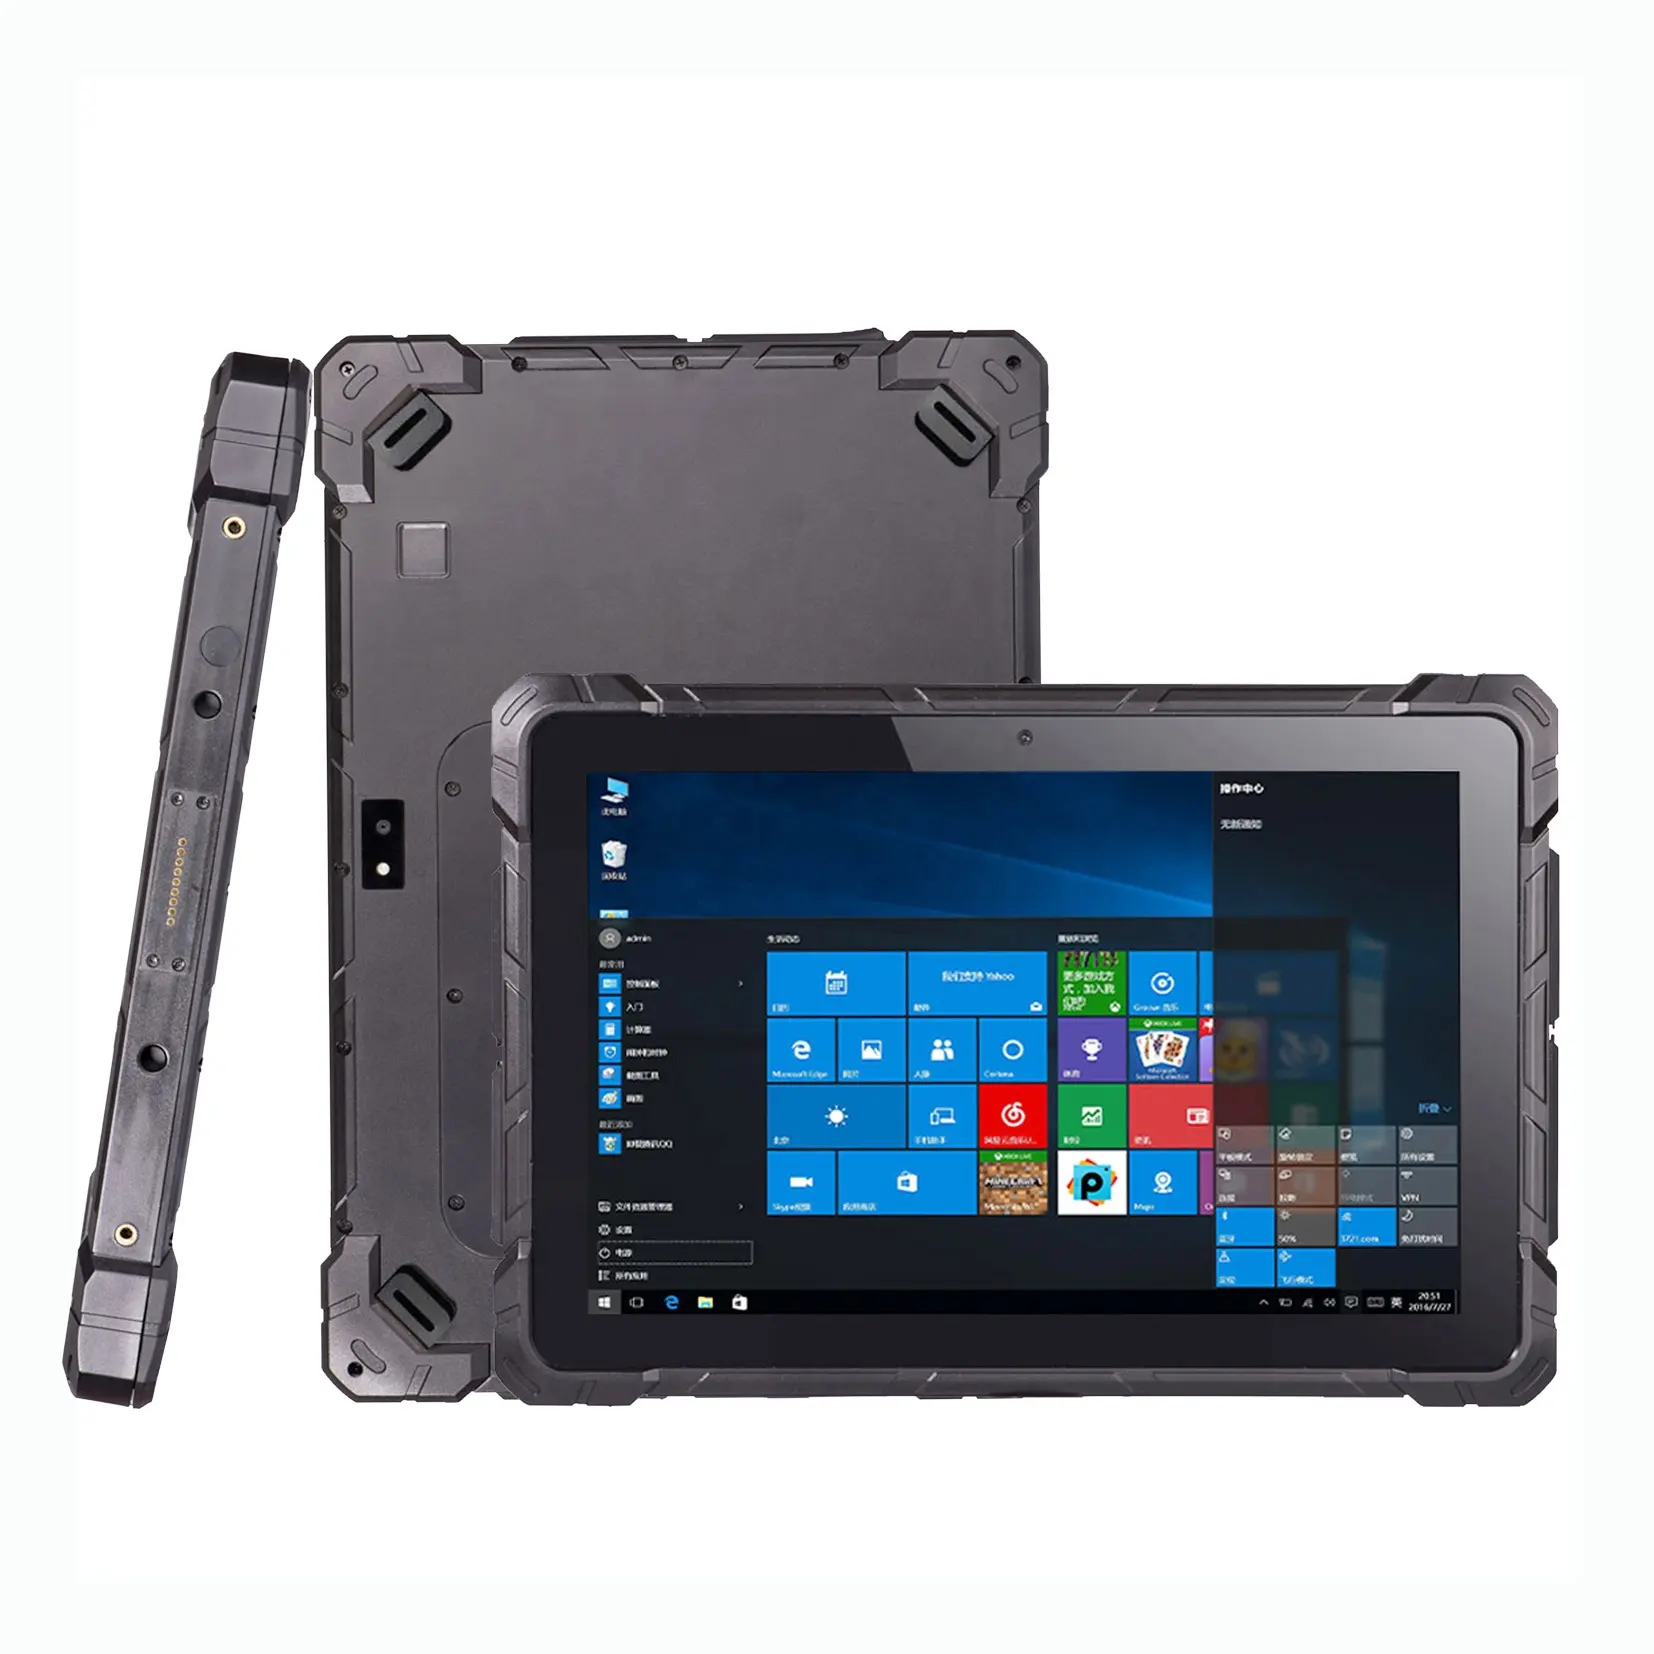 10.1 inch warehouse medical tablet computer IP67 Rugged industrial touch screen Mini PC